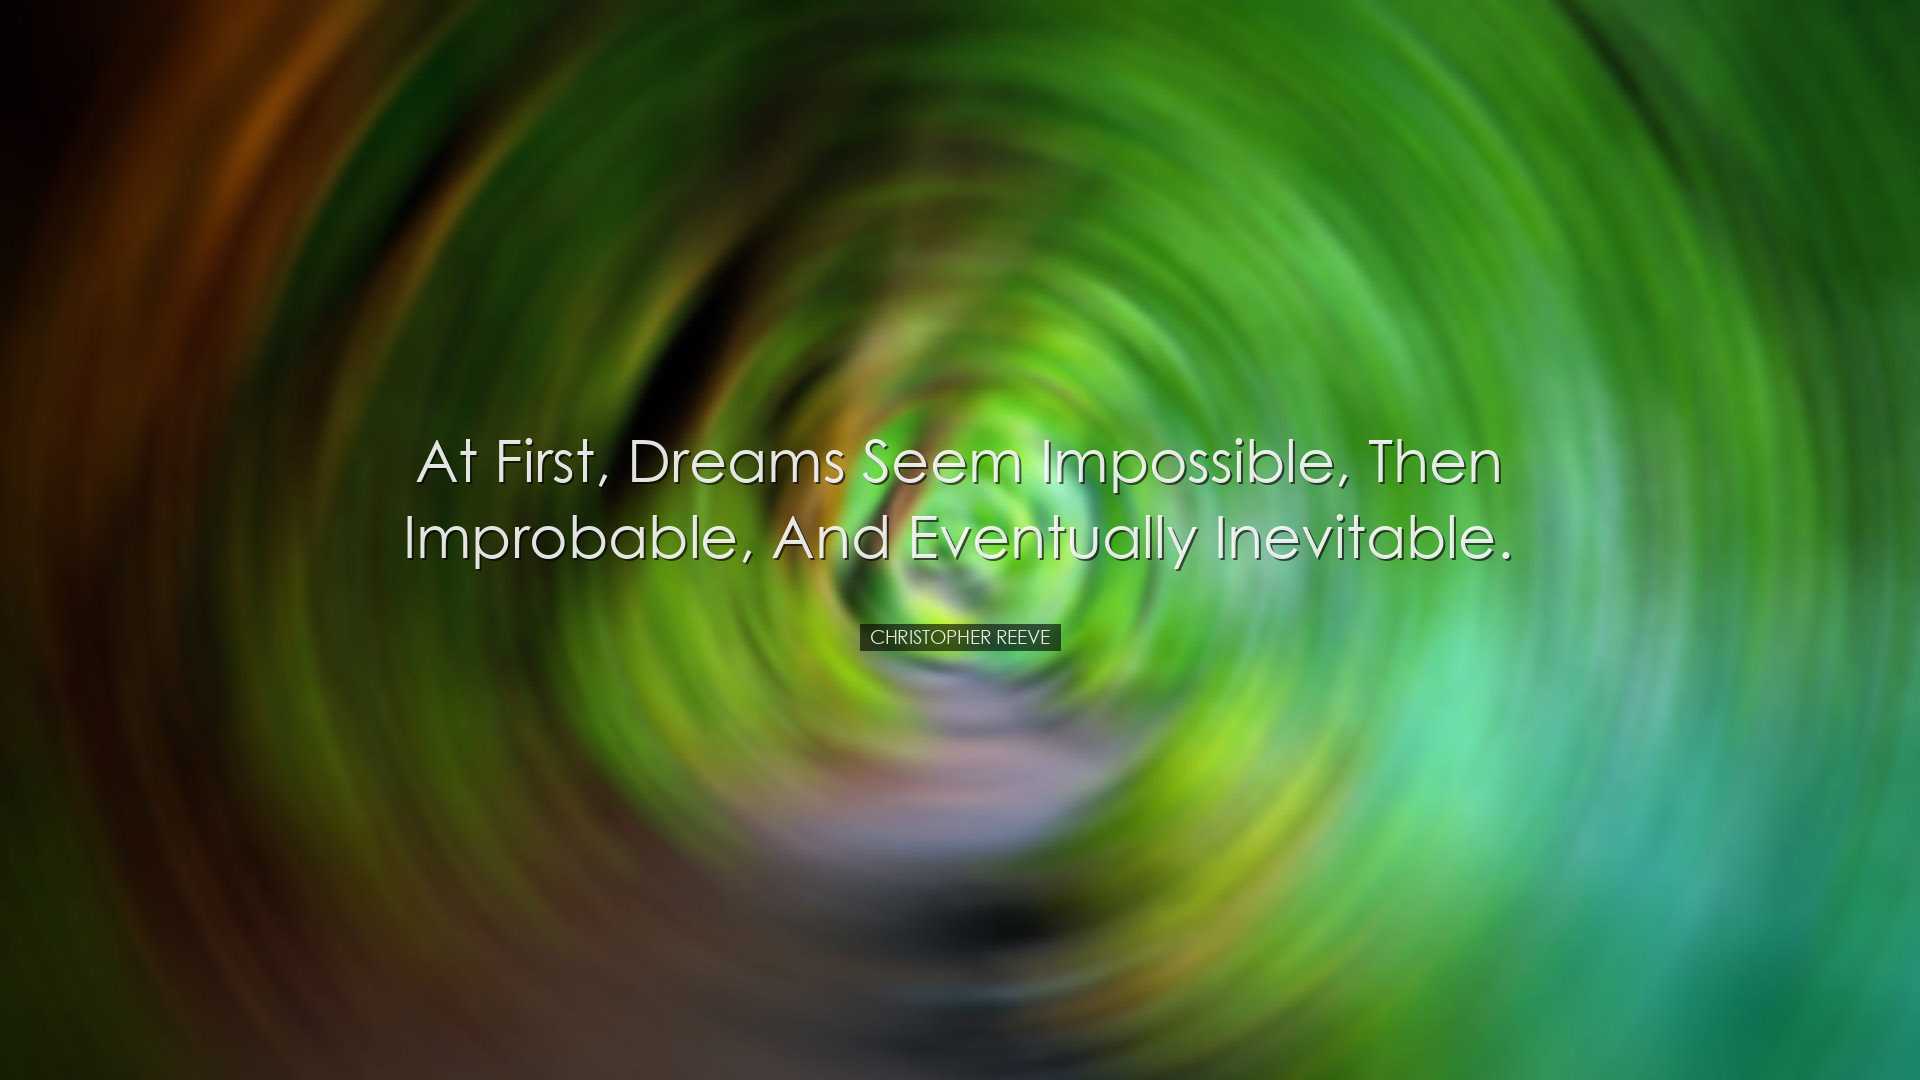 At first, dreams seem impossible, then improbable, and eventually